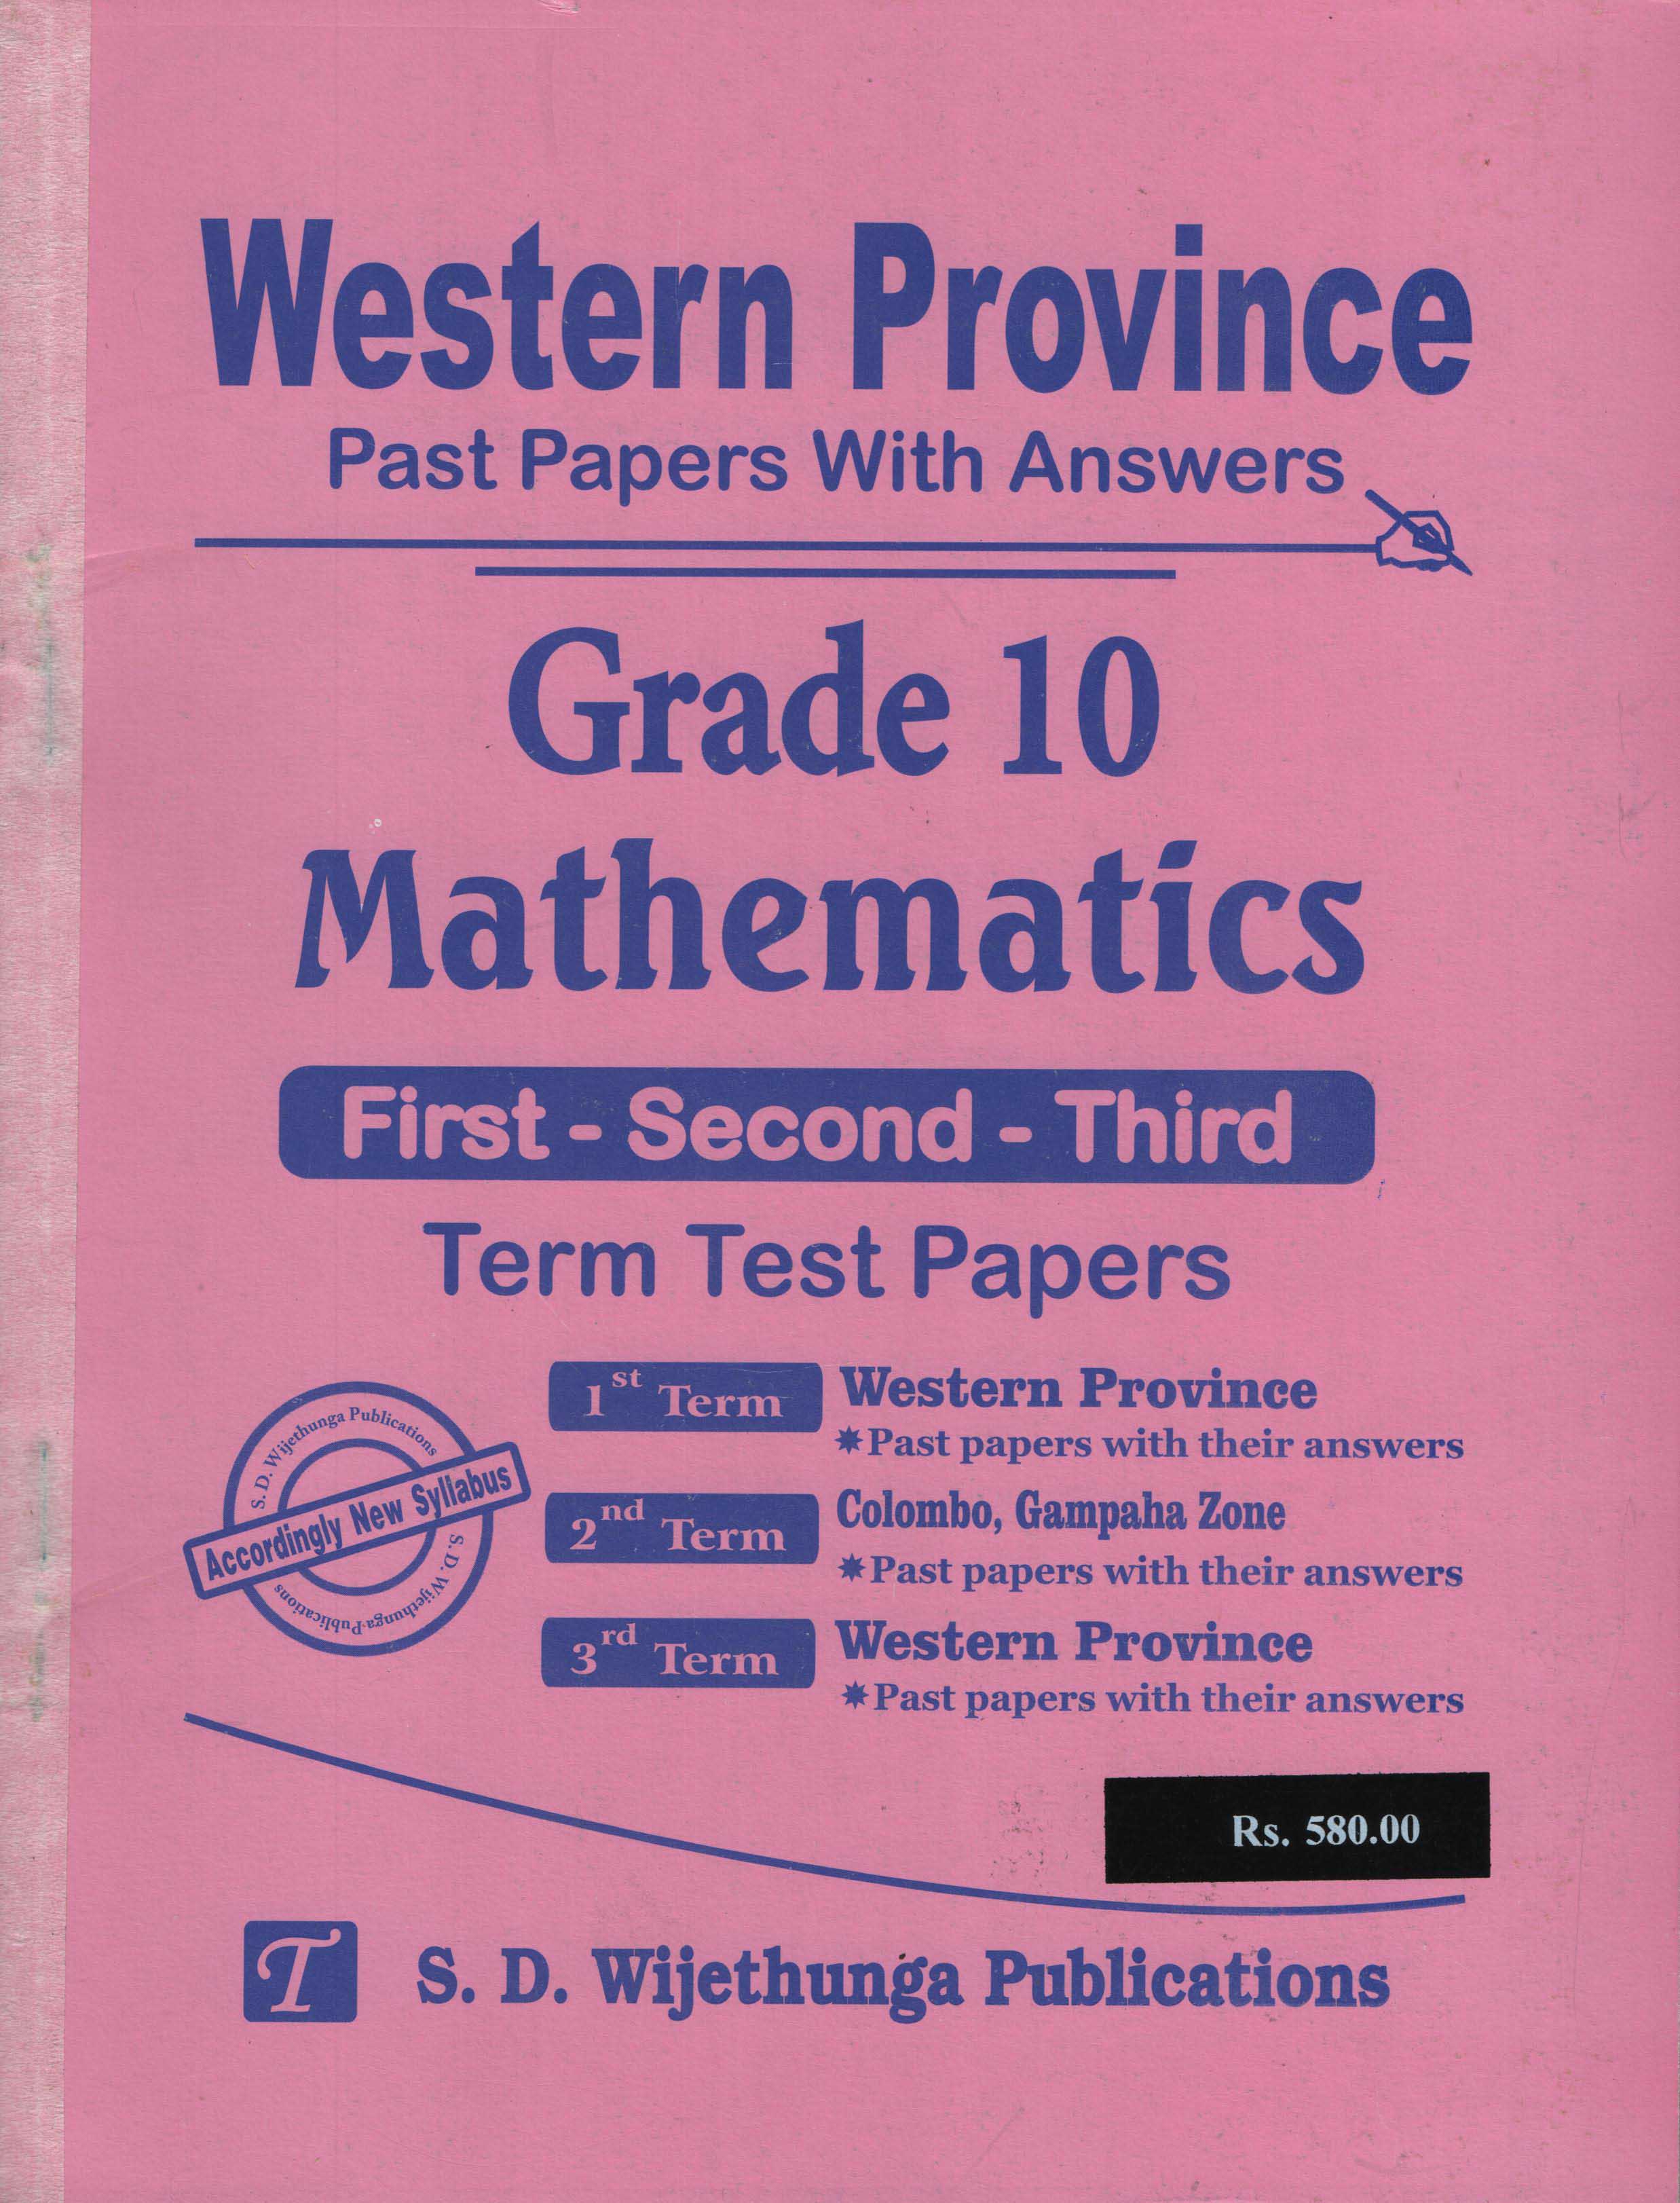 Western Province Past Papers with Answers Grade 10 Mathematics (First-Second-Third) Term Test Papers